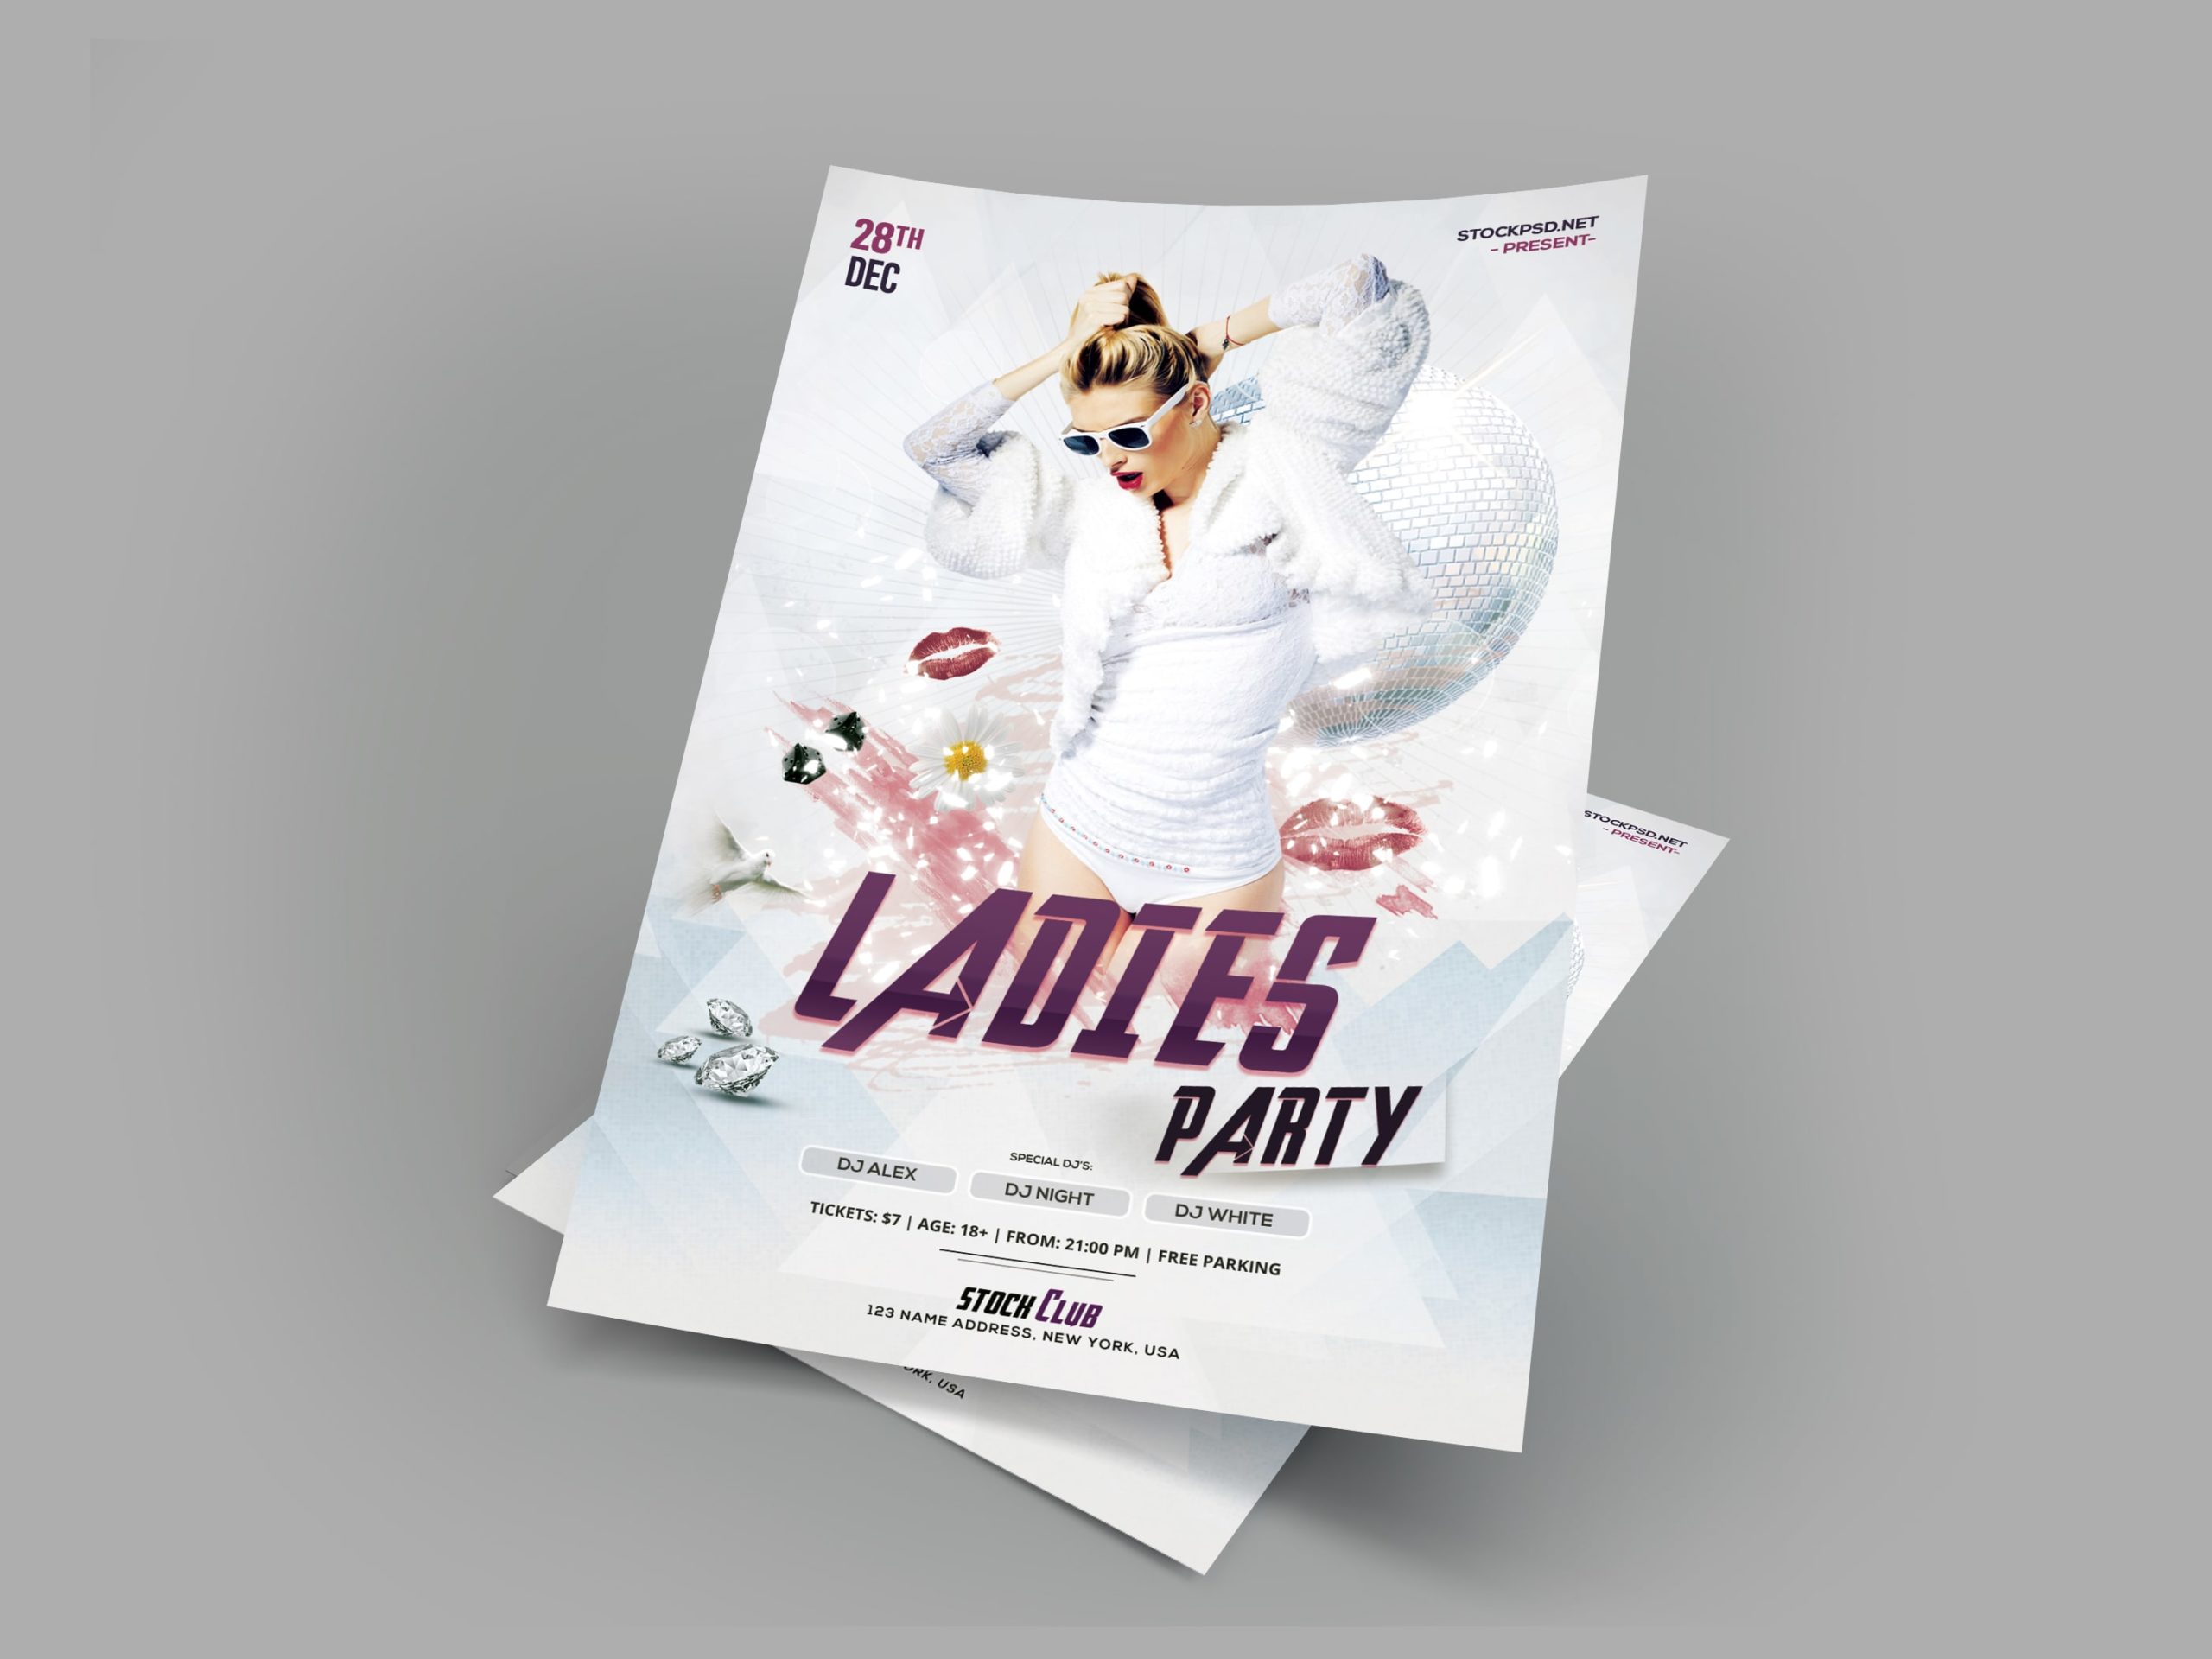 Ladies Party -Download Free PSD Flyer Template - PixelsDesign For All White Party Flyer Template Free